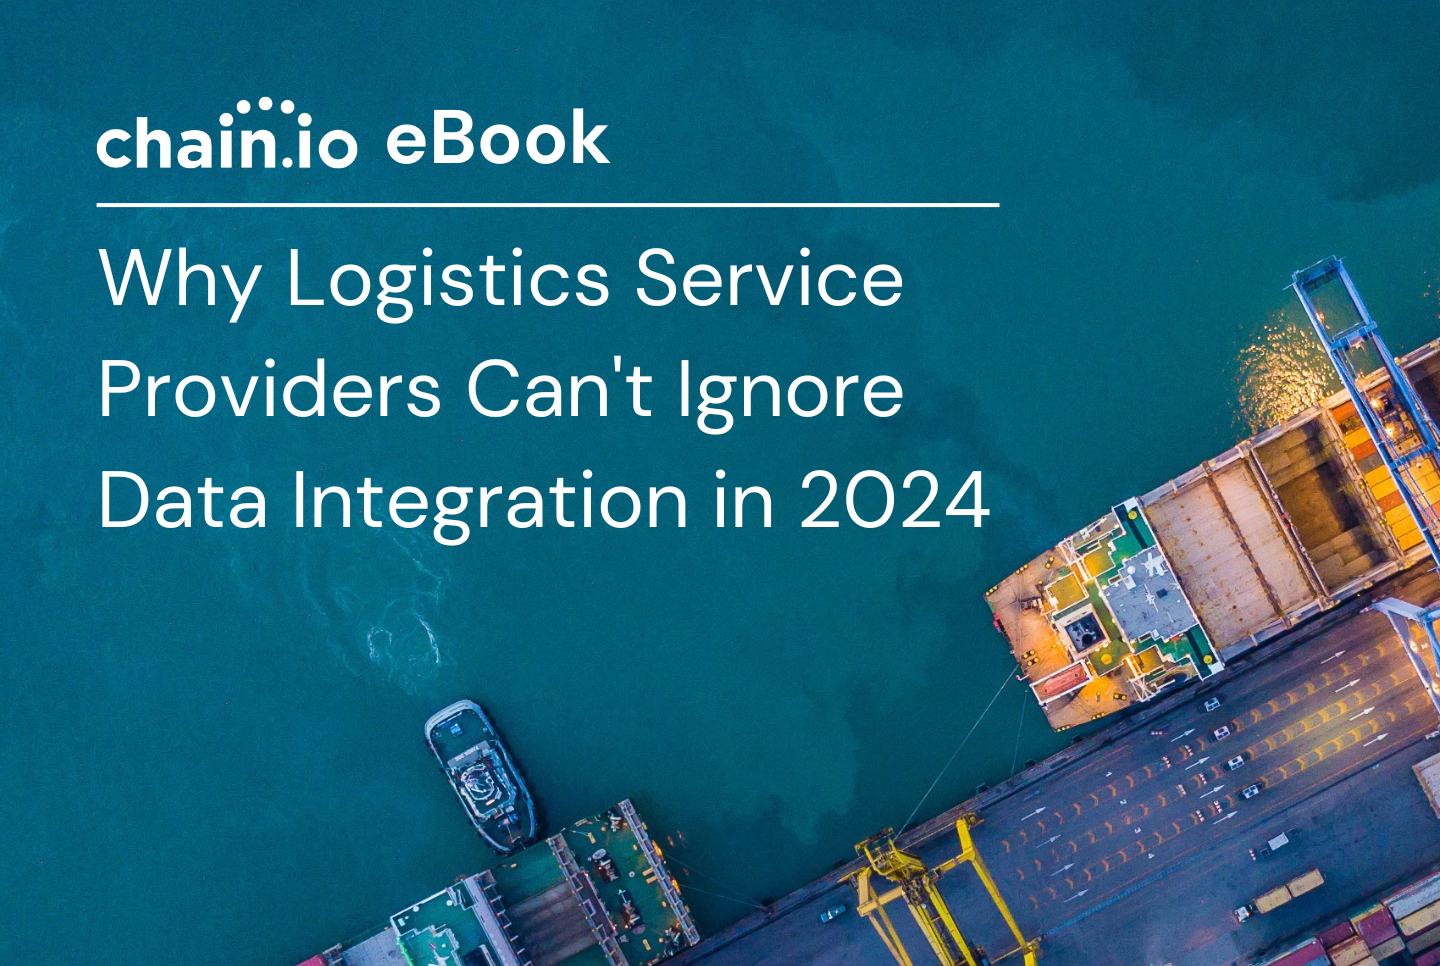 Why Logistics Service Providers Can't Ignore Data Integration in 2024